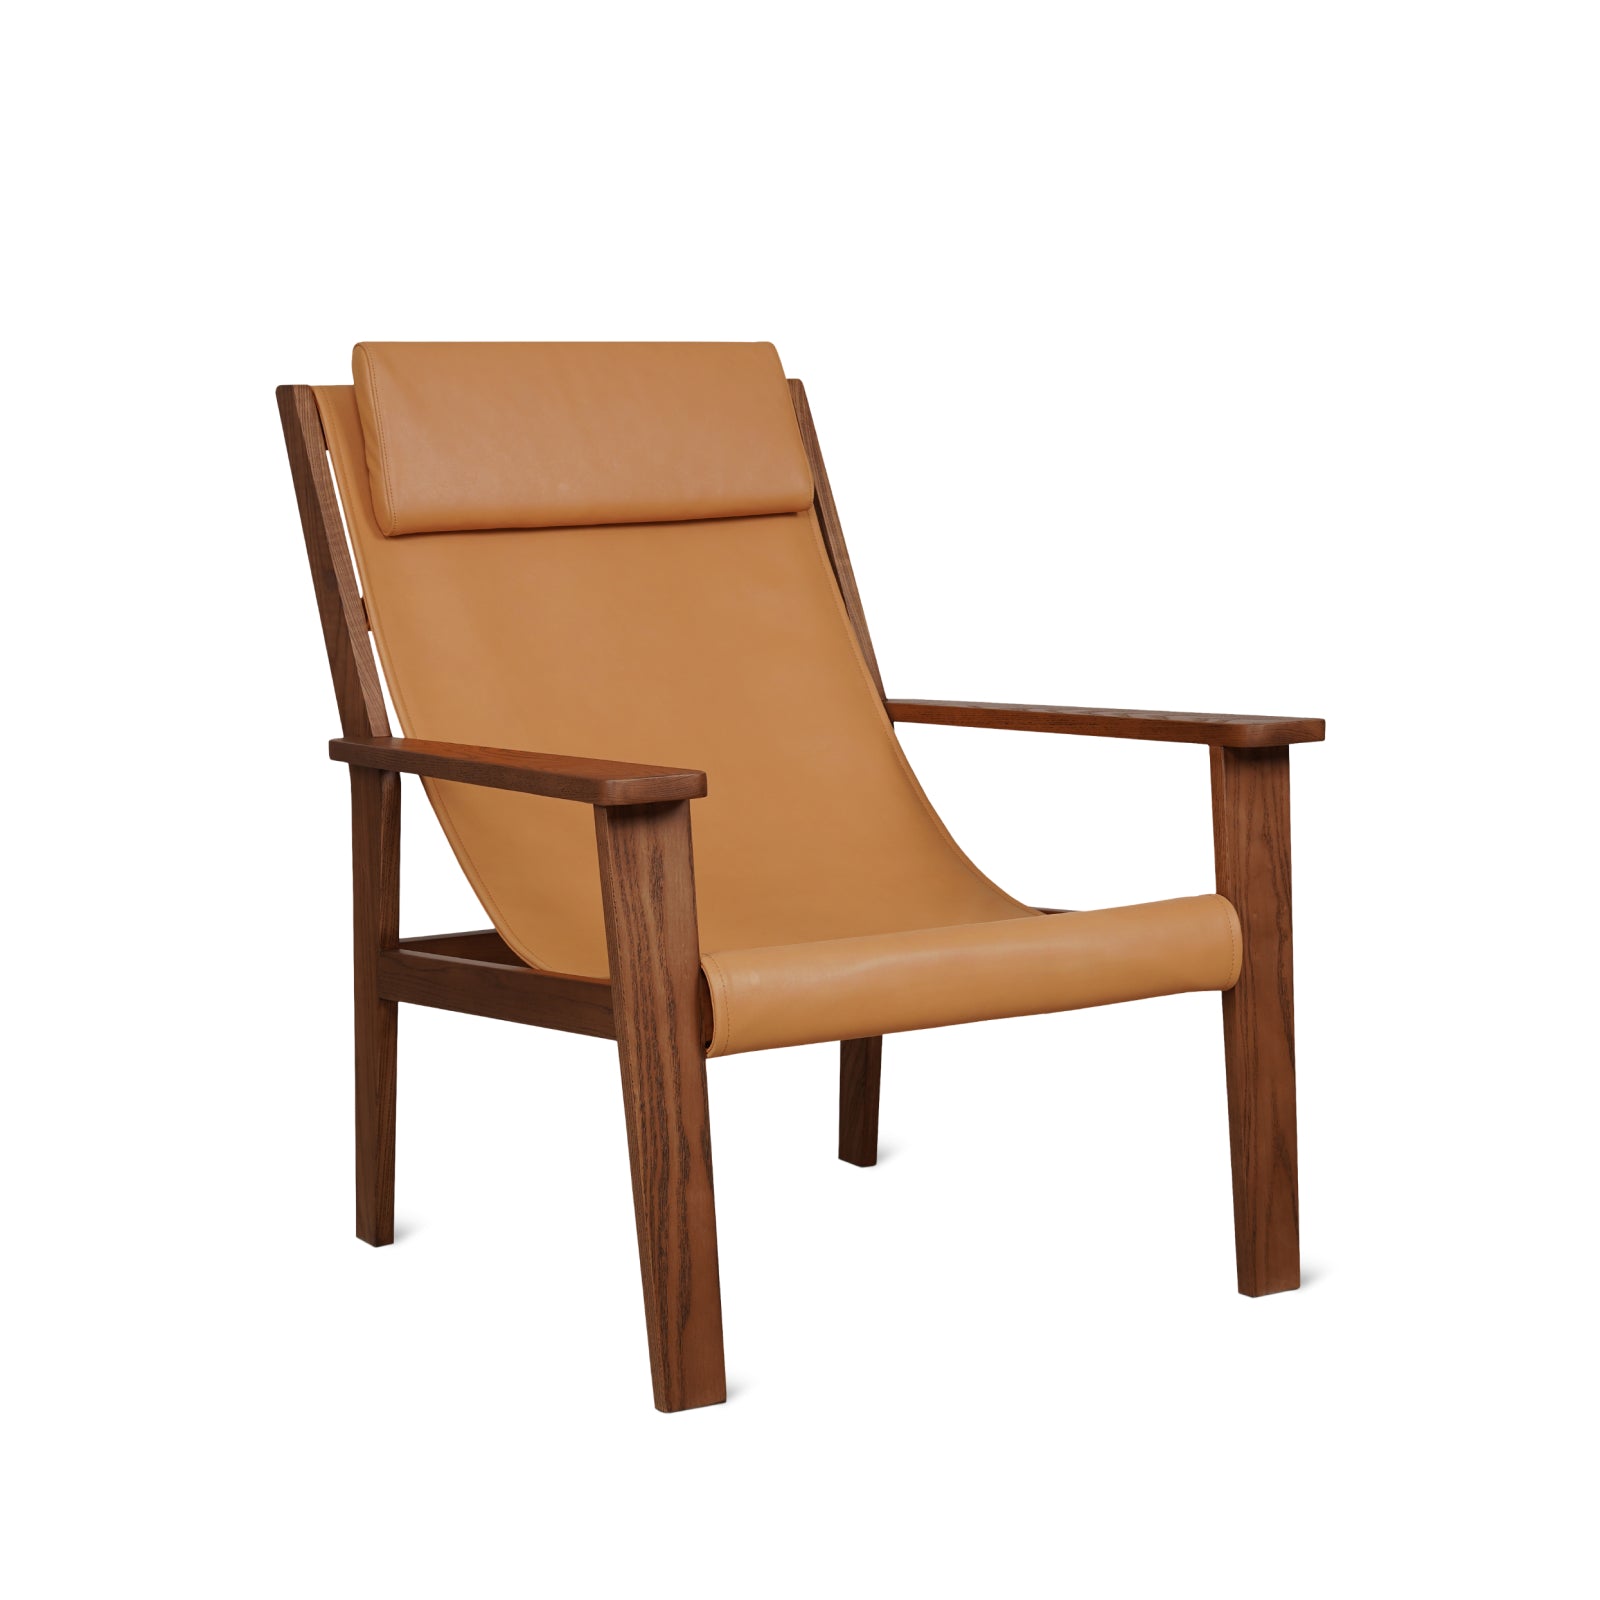 Sweet Life Sling Lounge Chair With Headrest, Terracotta Walnut - Image 10